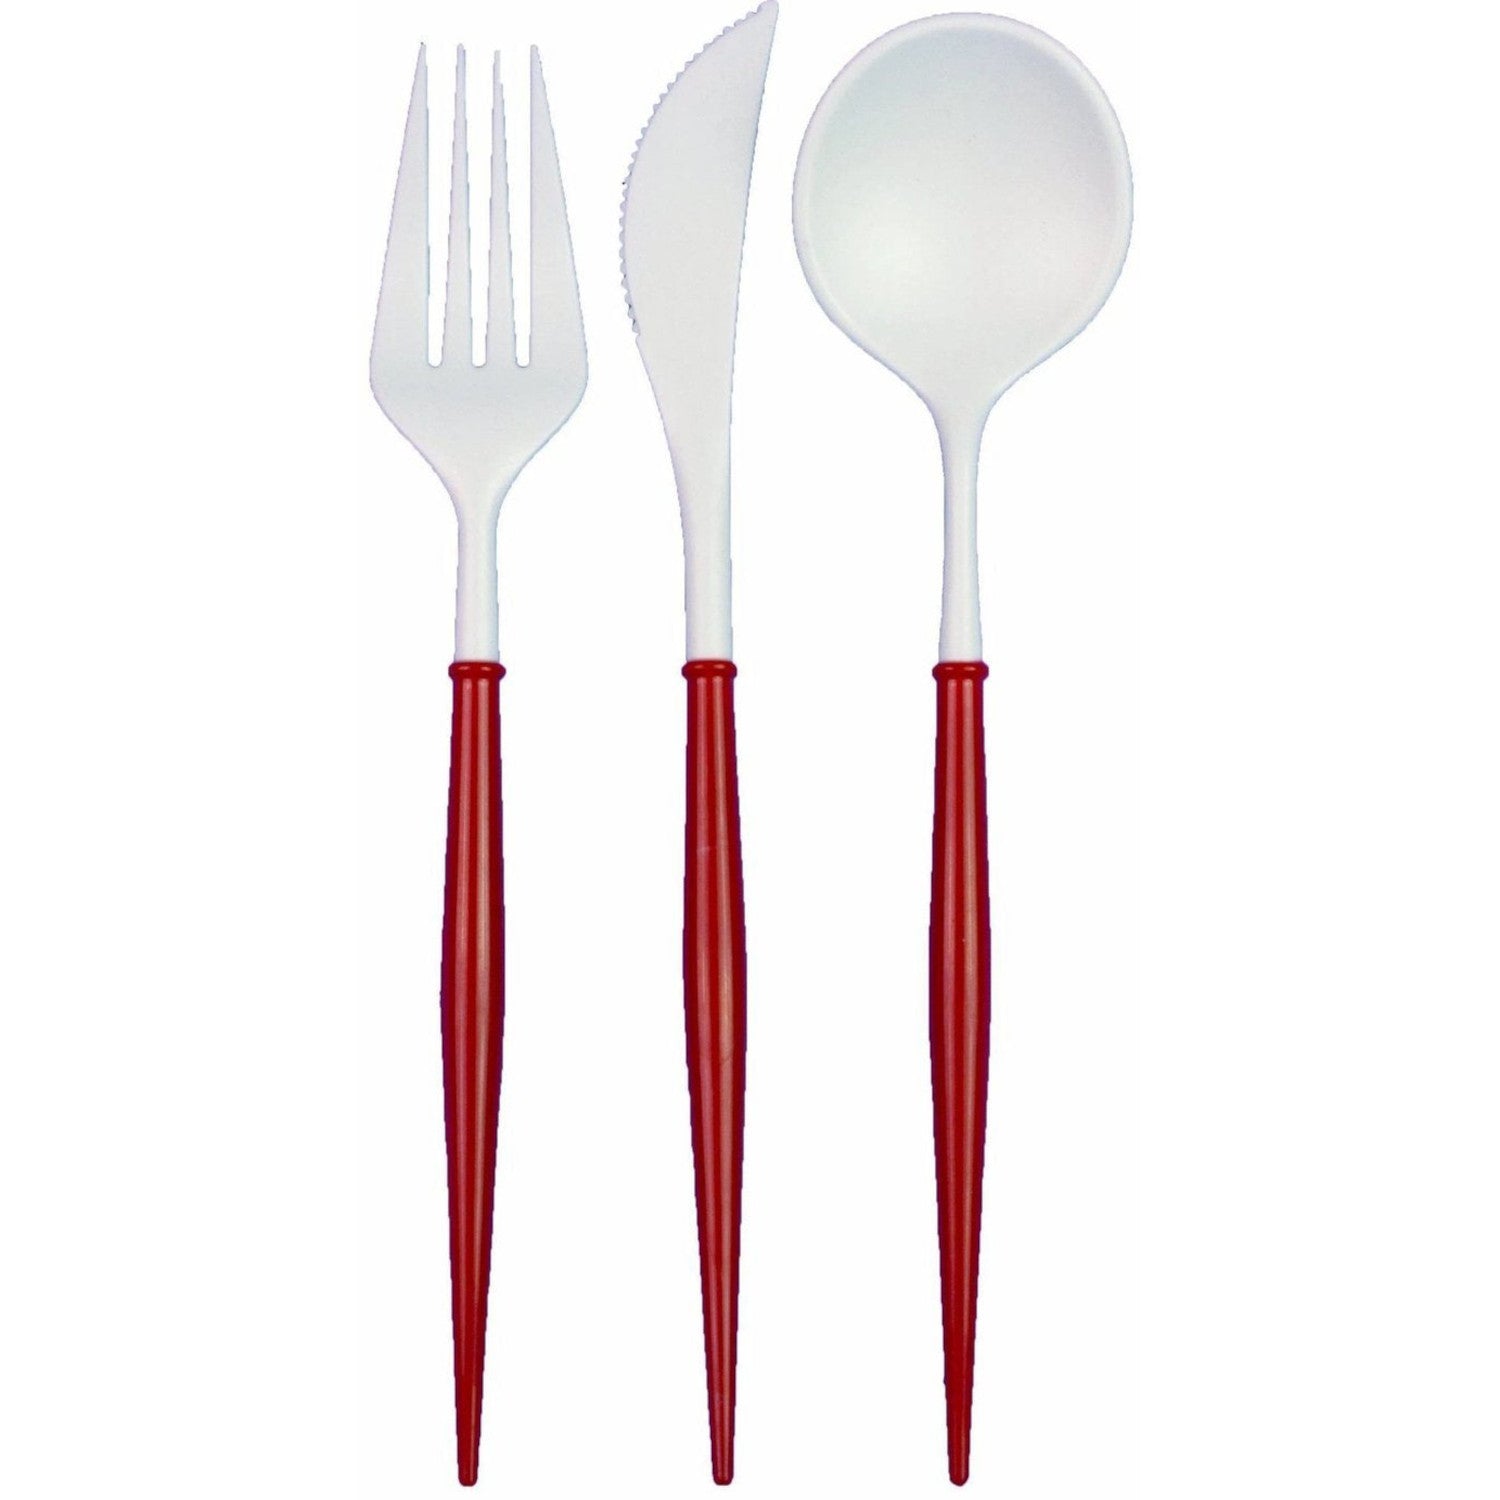 Set of Sophistiplate red-handled reusable plastic cutlery including a fork, knife, and spoon against a white background.